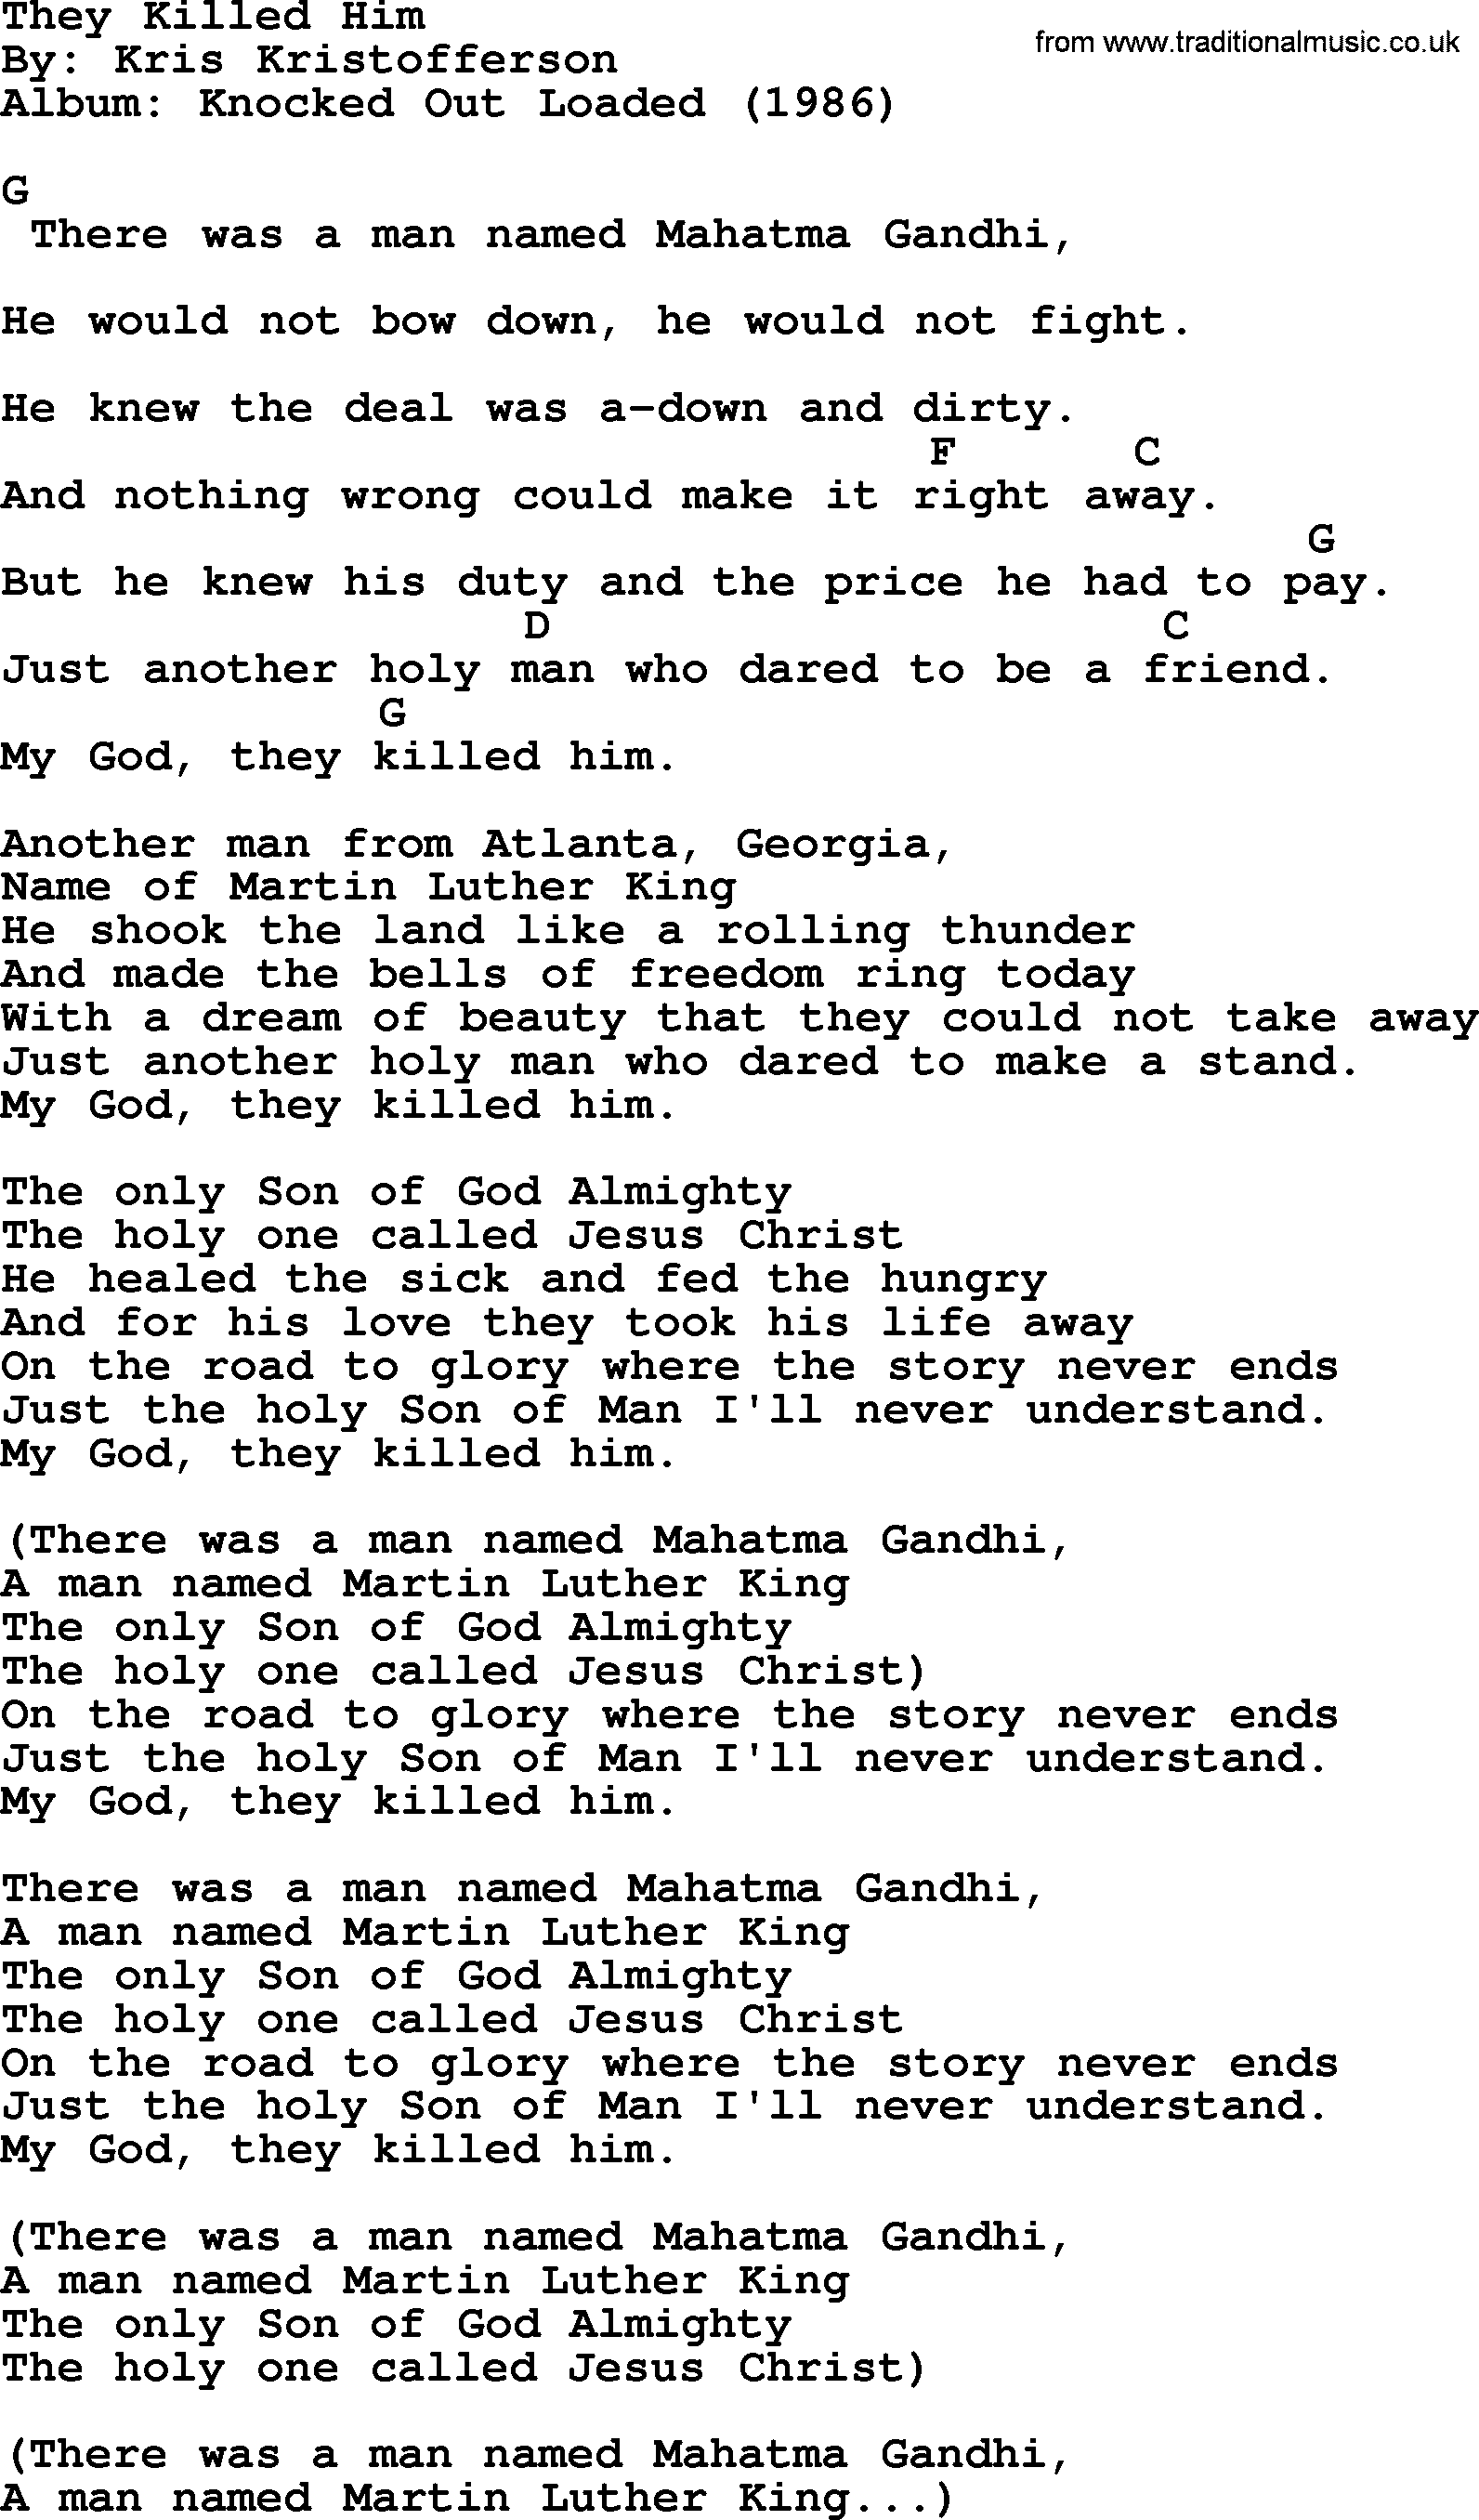 Bob Dylan song, lyrics with chords - They Killed Him